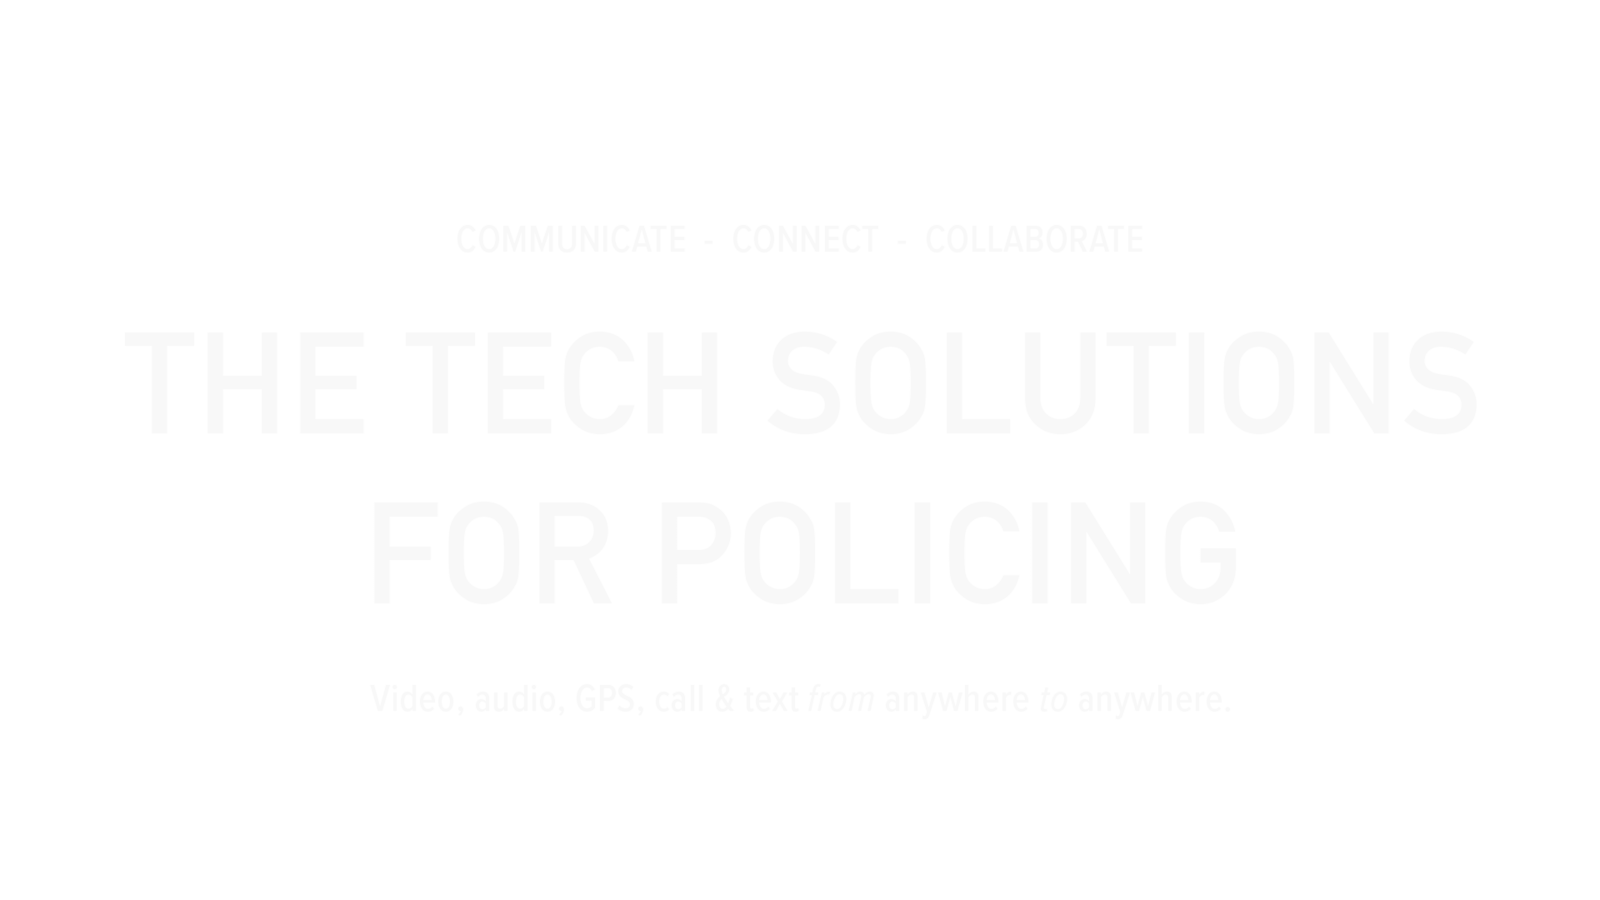 Communicate - connect - collaborate The tech solutions for policing. Video, audio, GPS, call & text from anywhere to anywhere